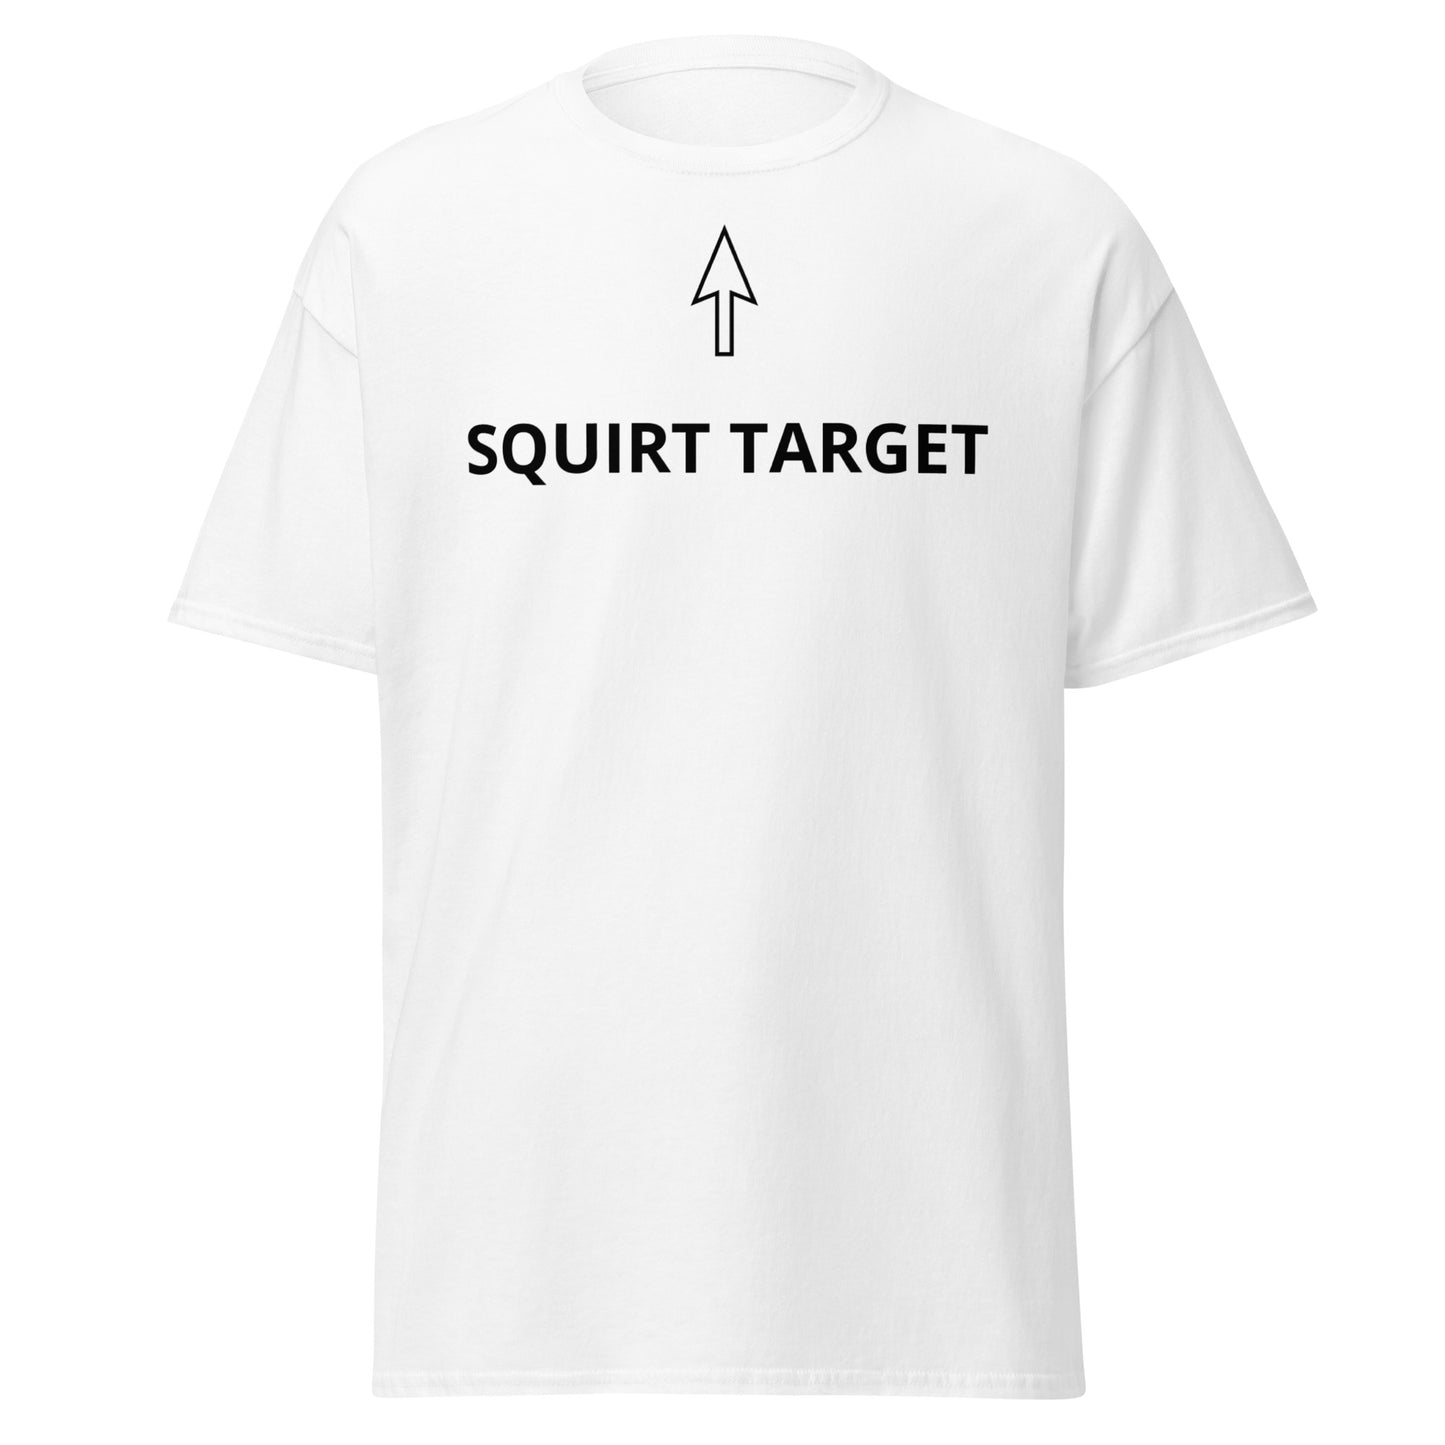 SQUIRT TARGET